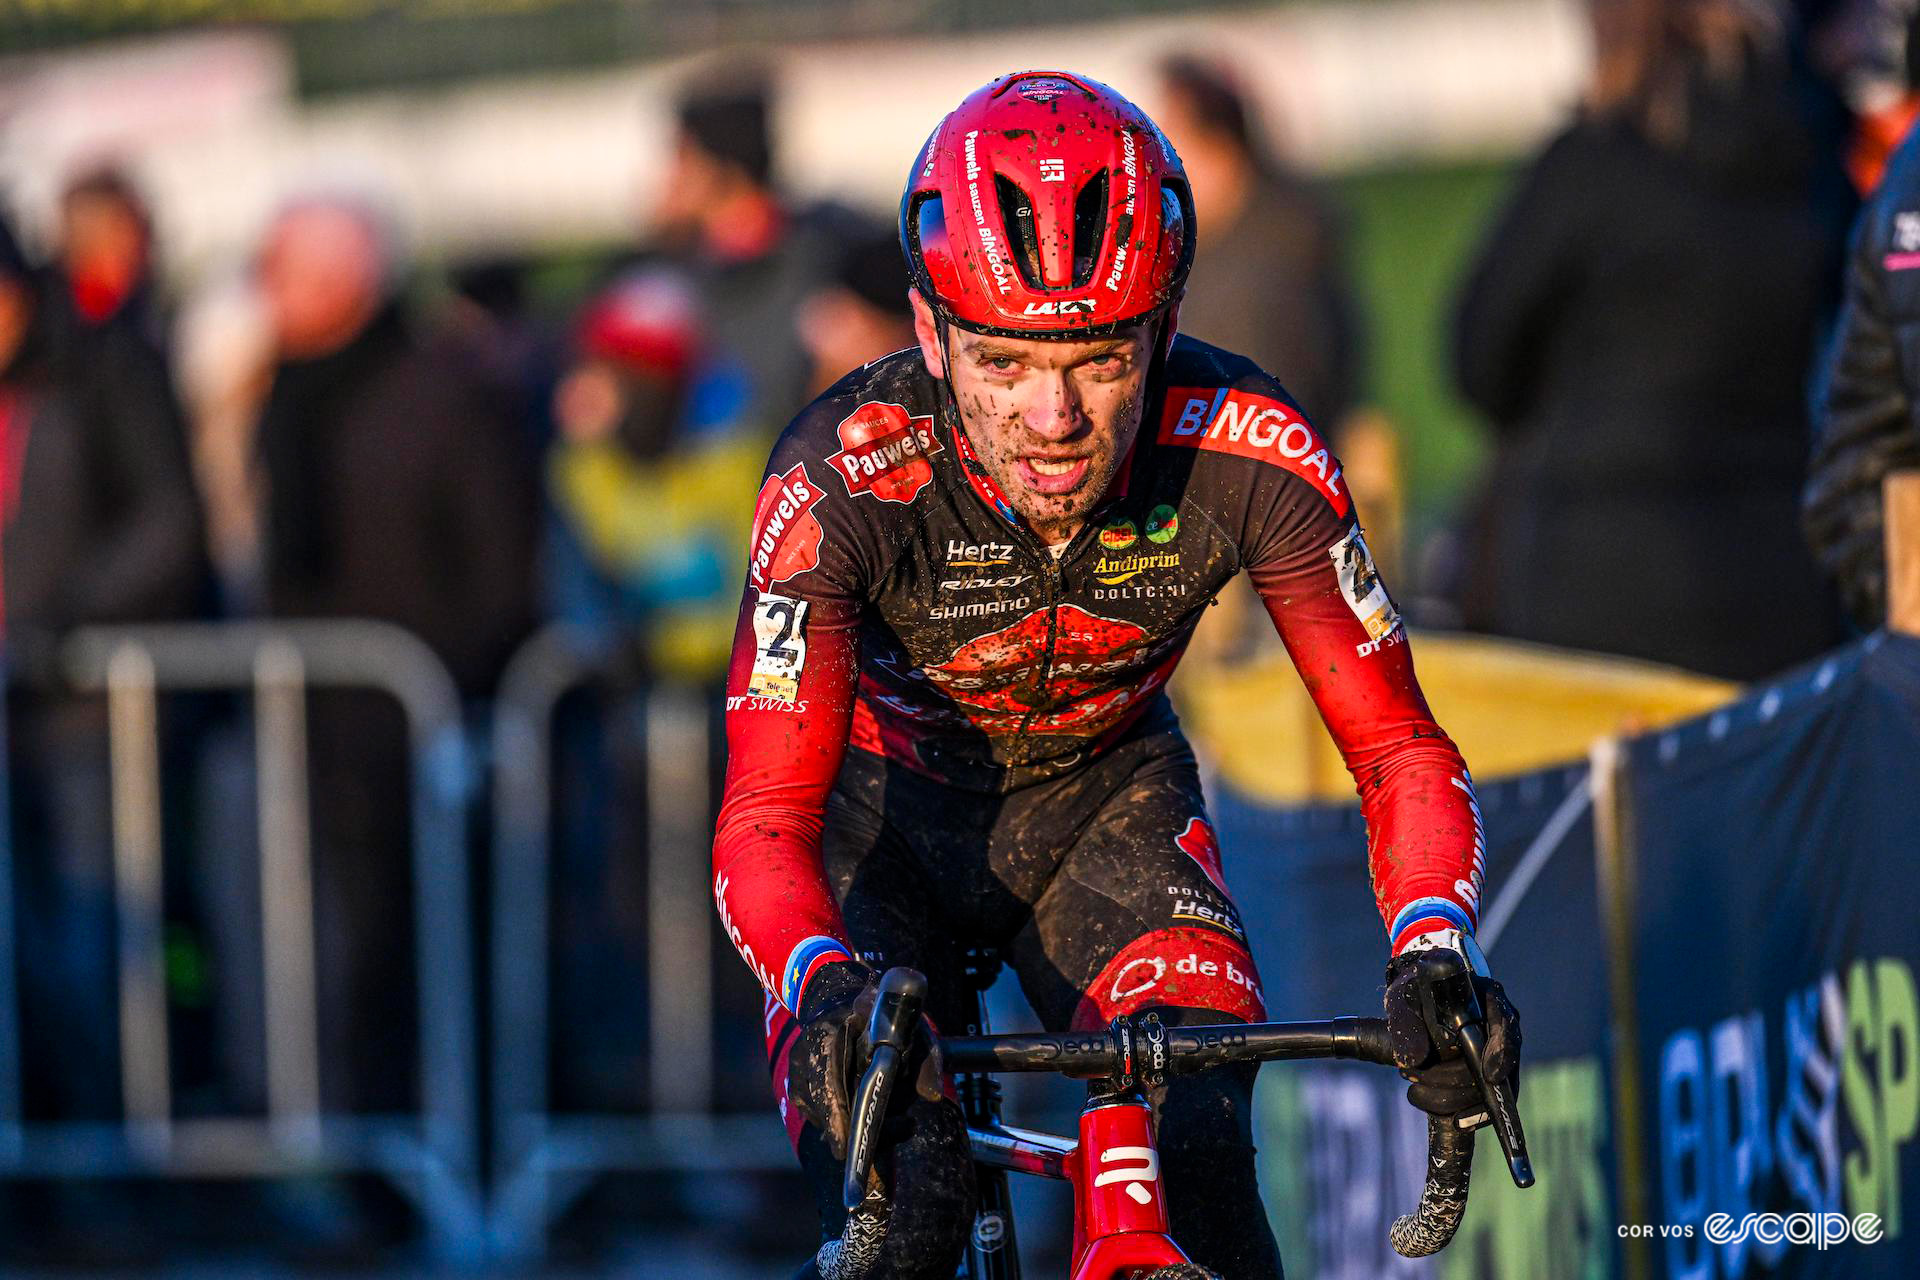 Wrapped up warm, Eli Iserbyt squints in the late-afternoon sun during Cyclocross Superprestige Boom.